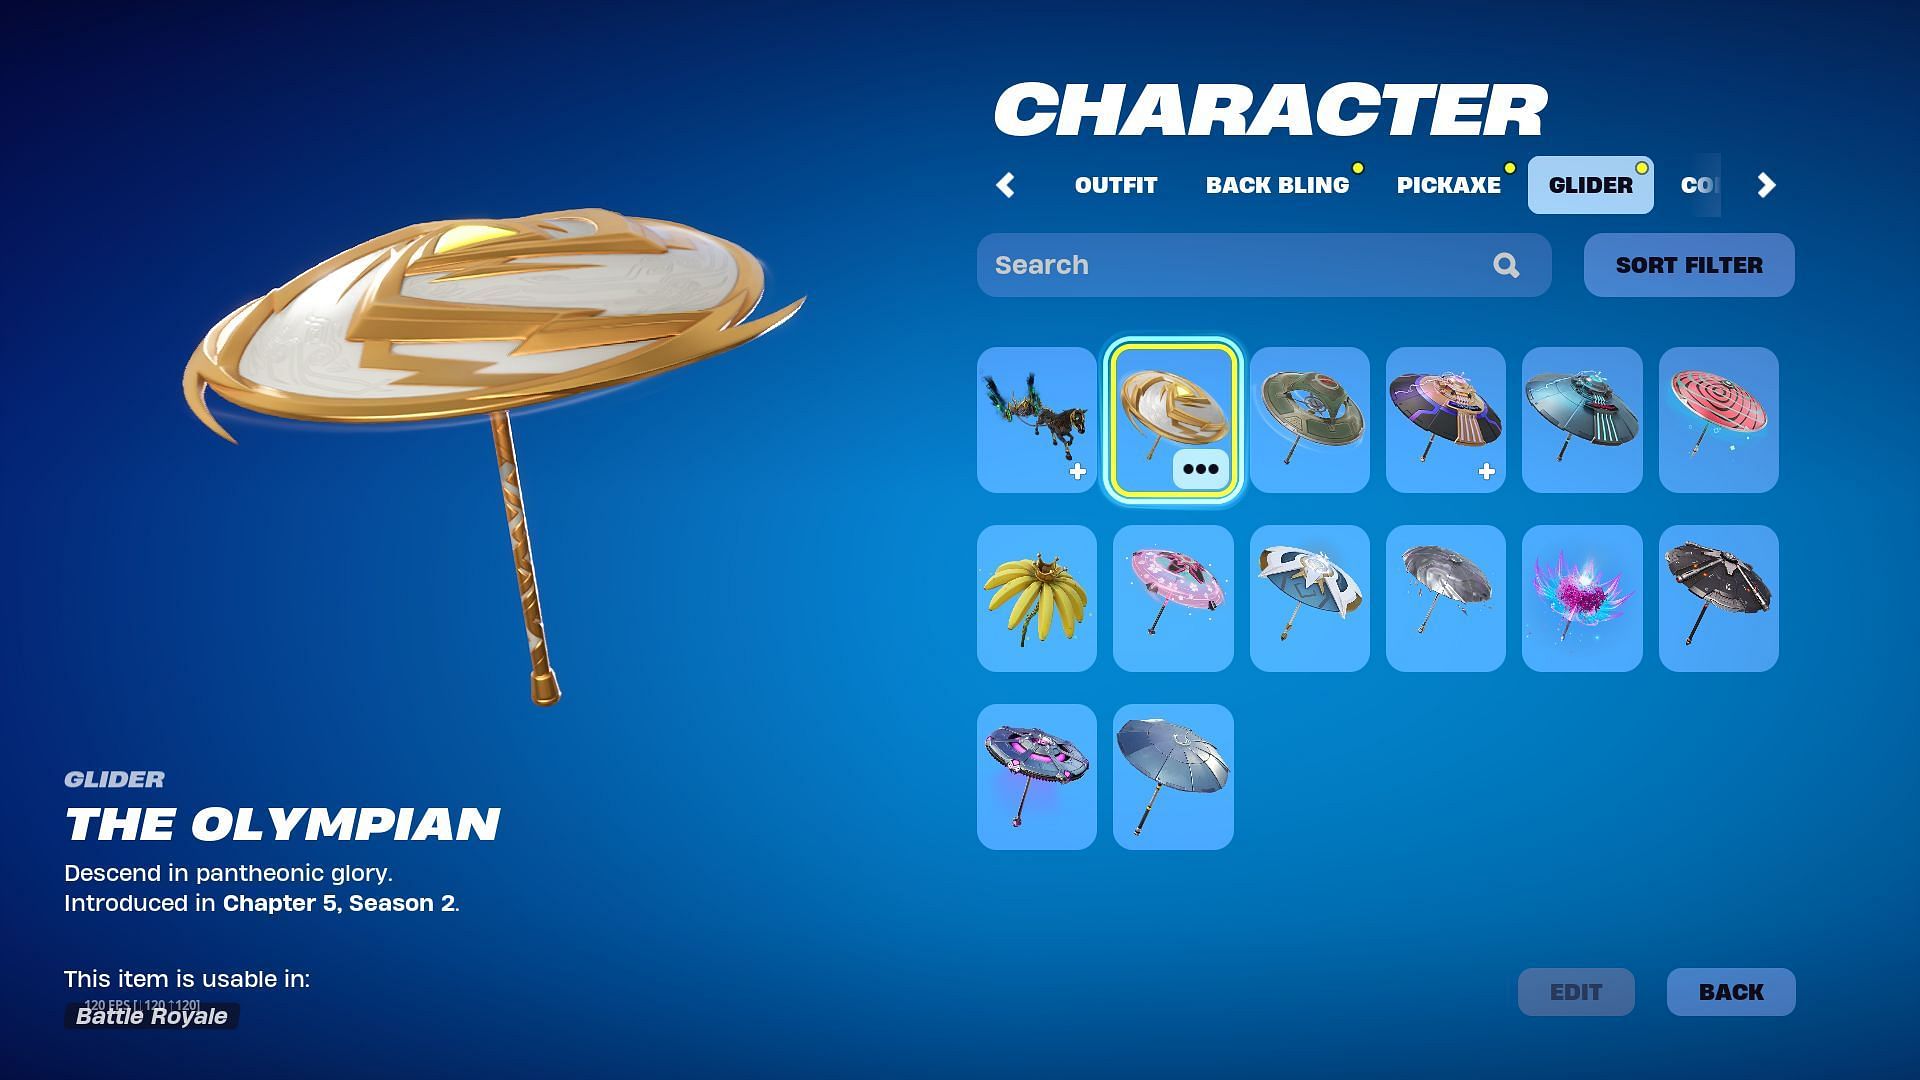 Players still have not received the Fortnite Chapter 5 Season 3 Wrecked Victory Umbrella (Image via Epic Games)